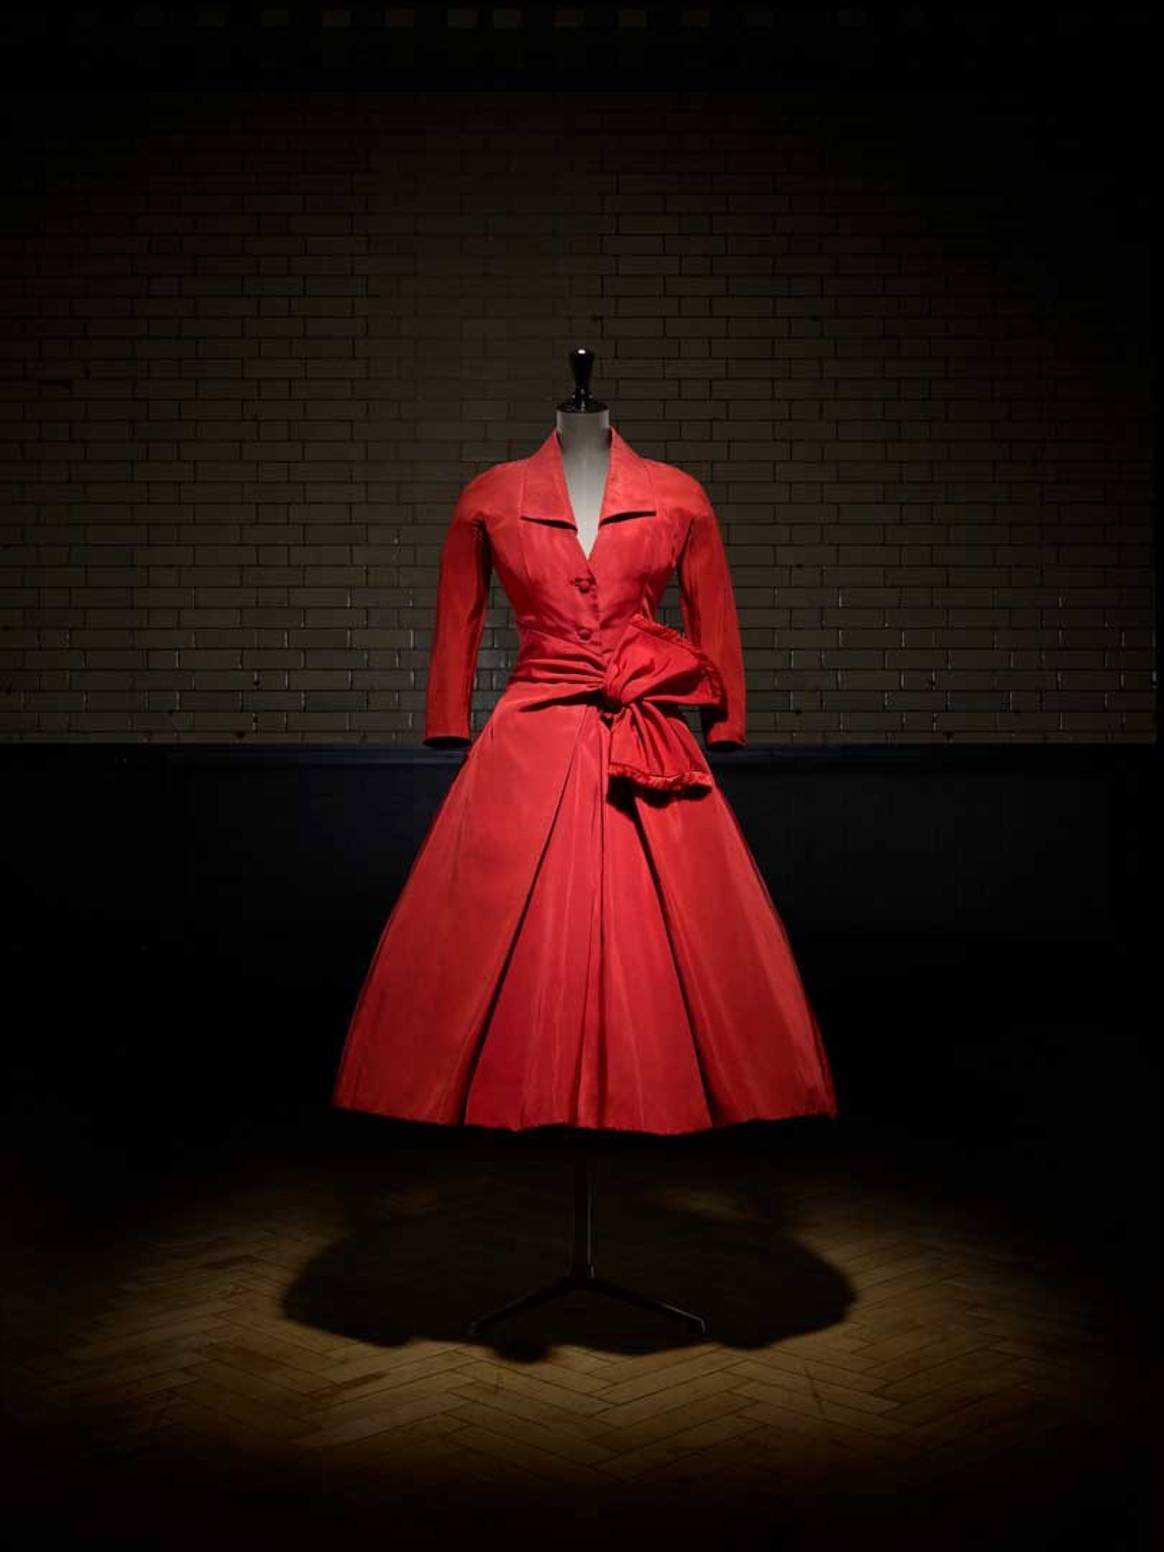 London's V&A Museum to stage 'reimagined' hit Dior expo